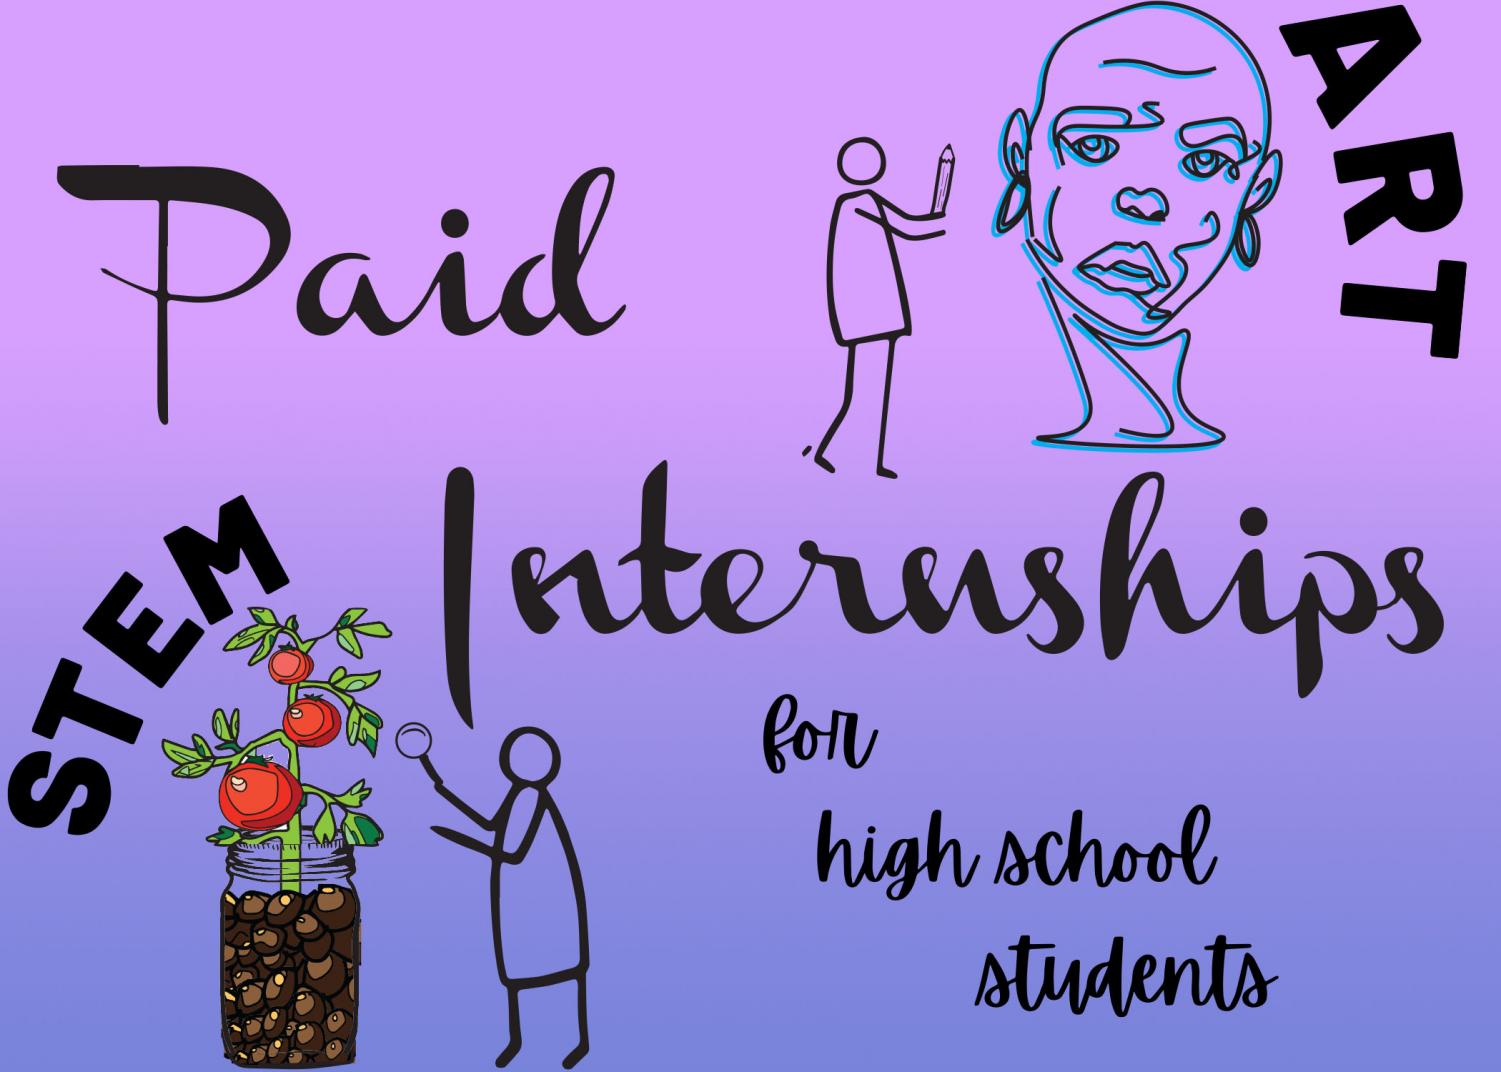 Paid+internships+bring+classroom+skills+to+the+workplace+for+relevant%2C+real-world+learning.+Art+by+Sofia+Leotta.+%0A